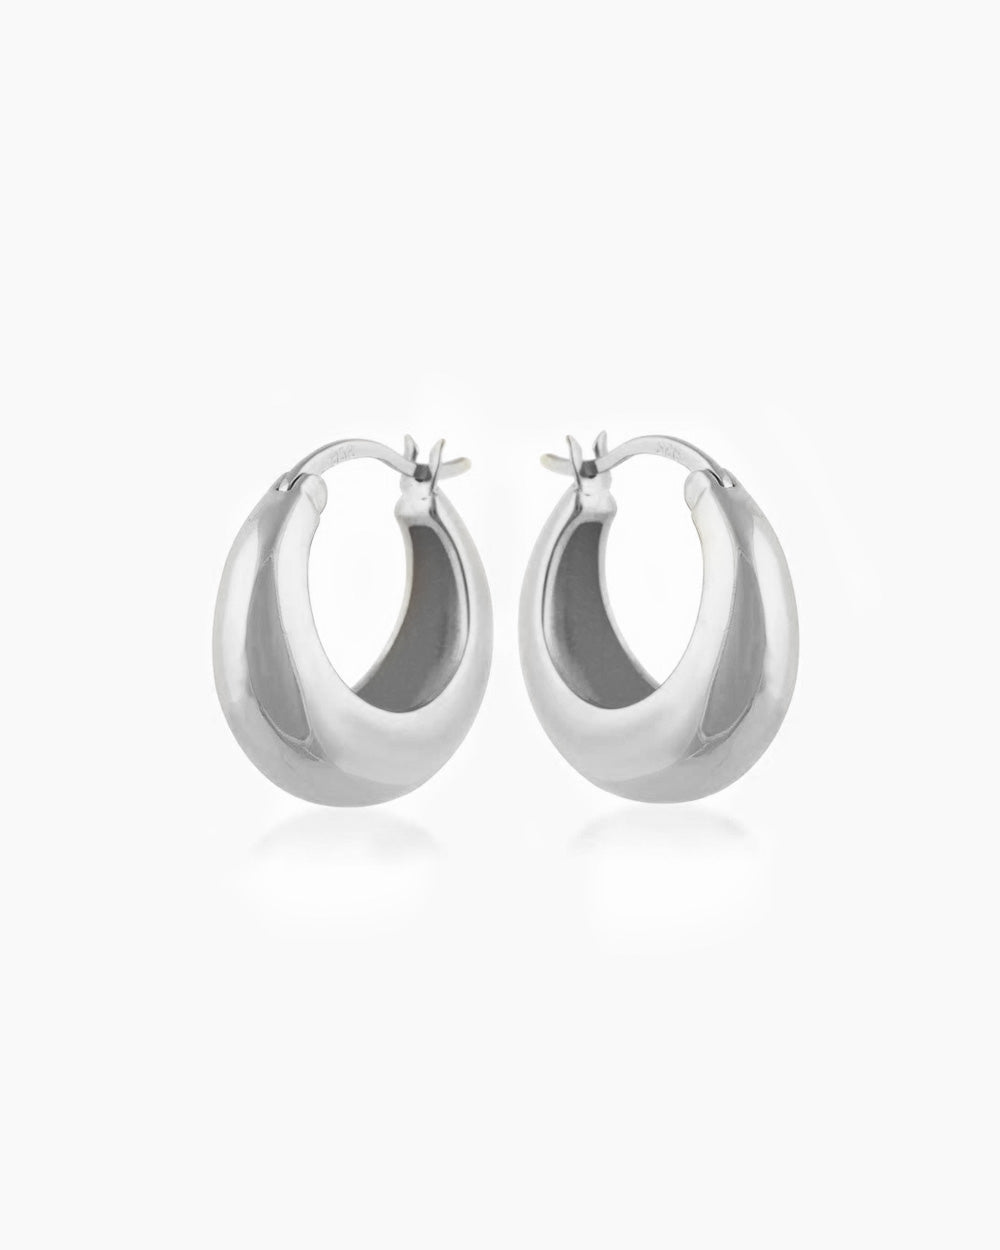 THE SILVER HAILEY HOOPS – The M Jewelers